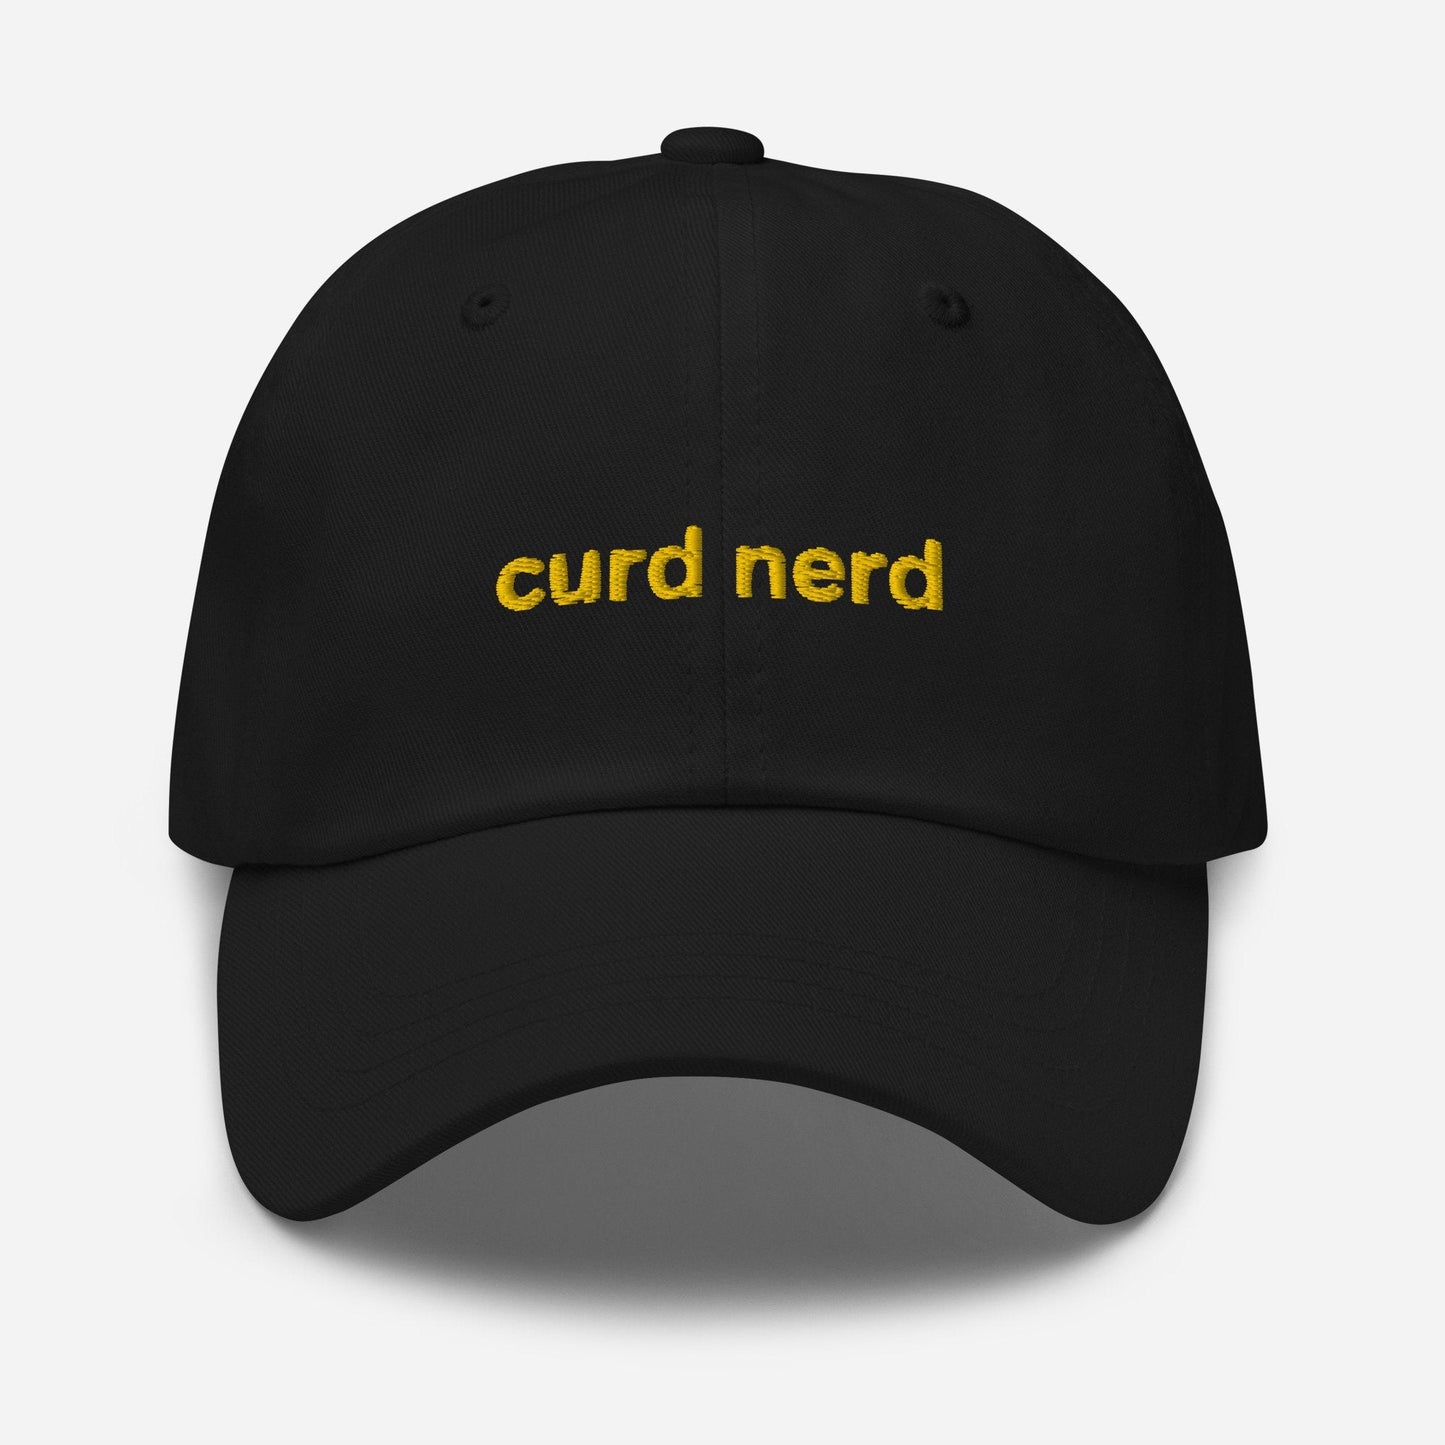 Curd Nerd Dad Hat - Gift for Cheese lovers, Home Cooks & Chefs - Embroidered Cotton Cap - Evilwater Originals